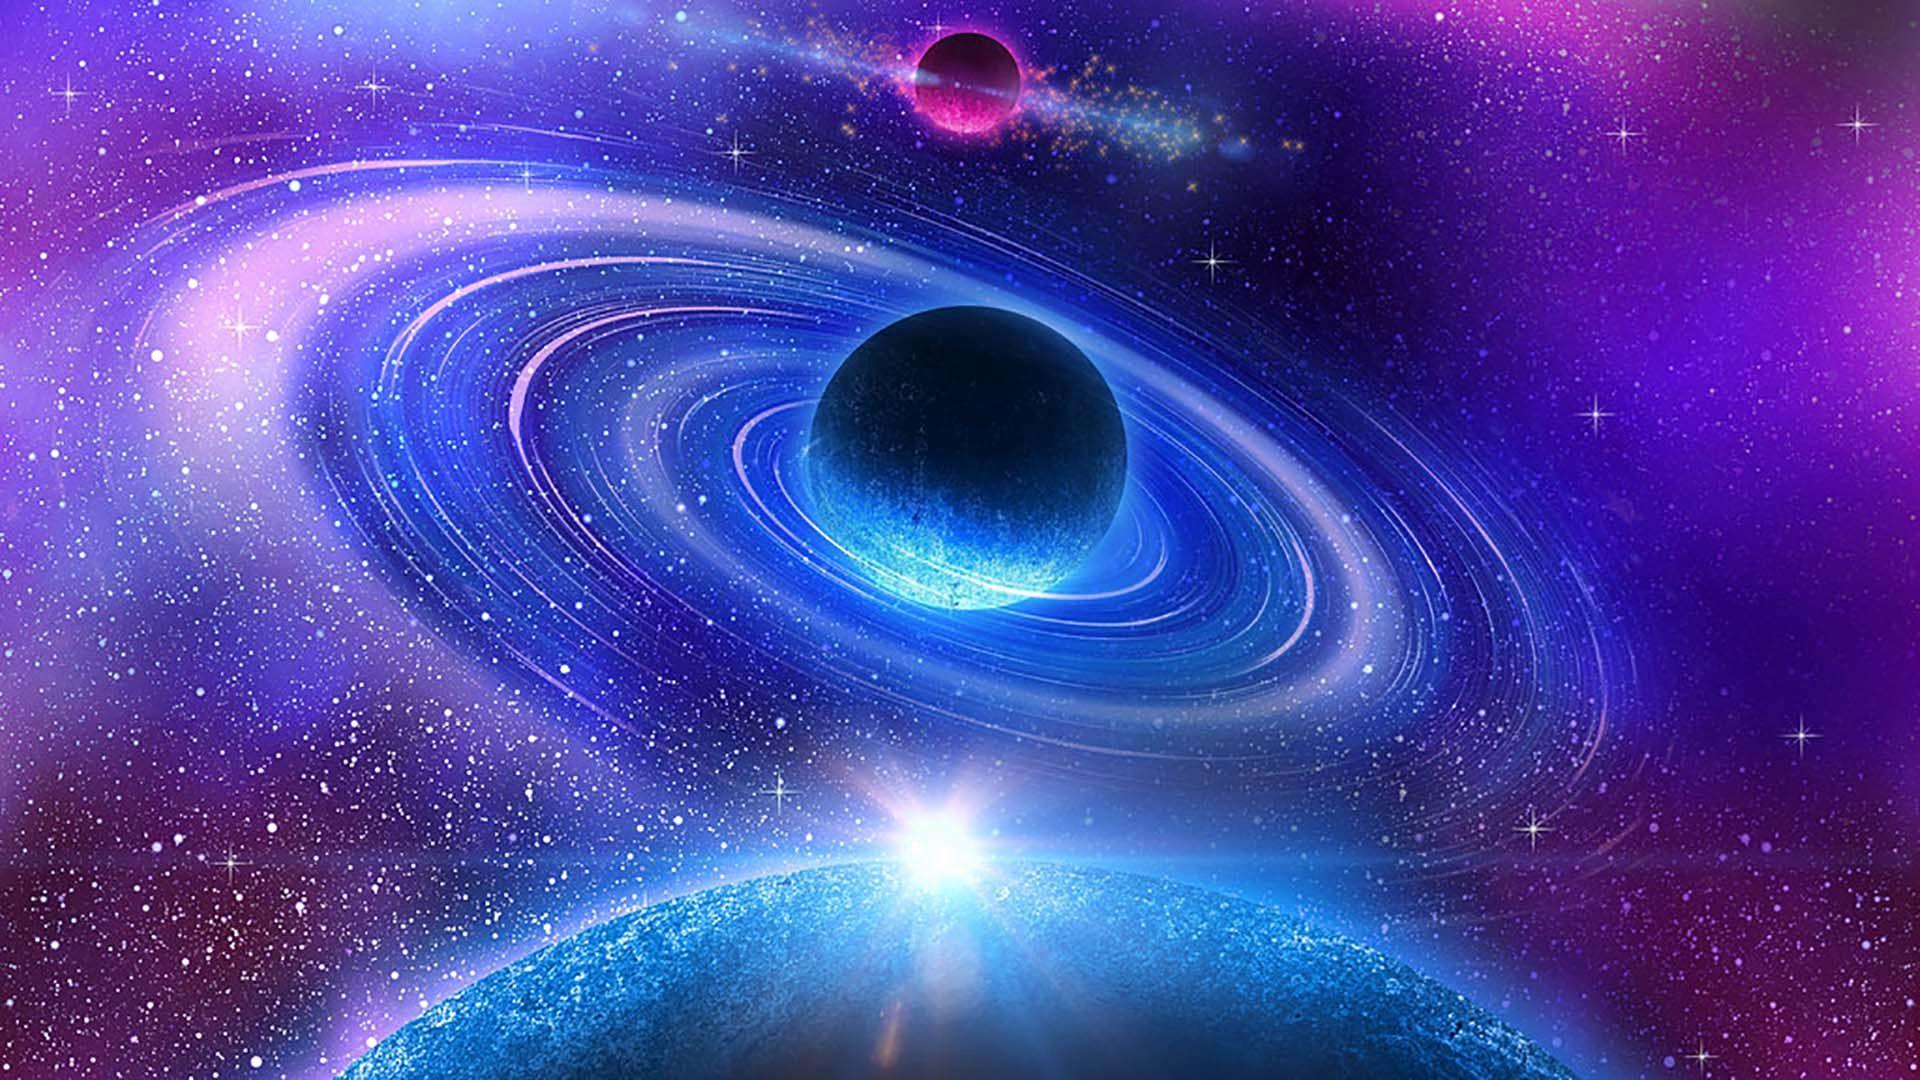 Cool Galaxy Wallpapers Top Free Cool Galaxy Backgrounds Wallpaperaccess